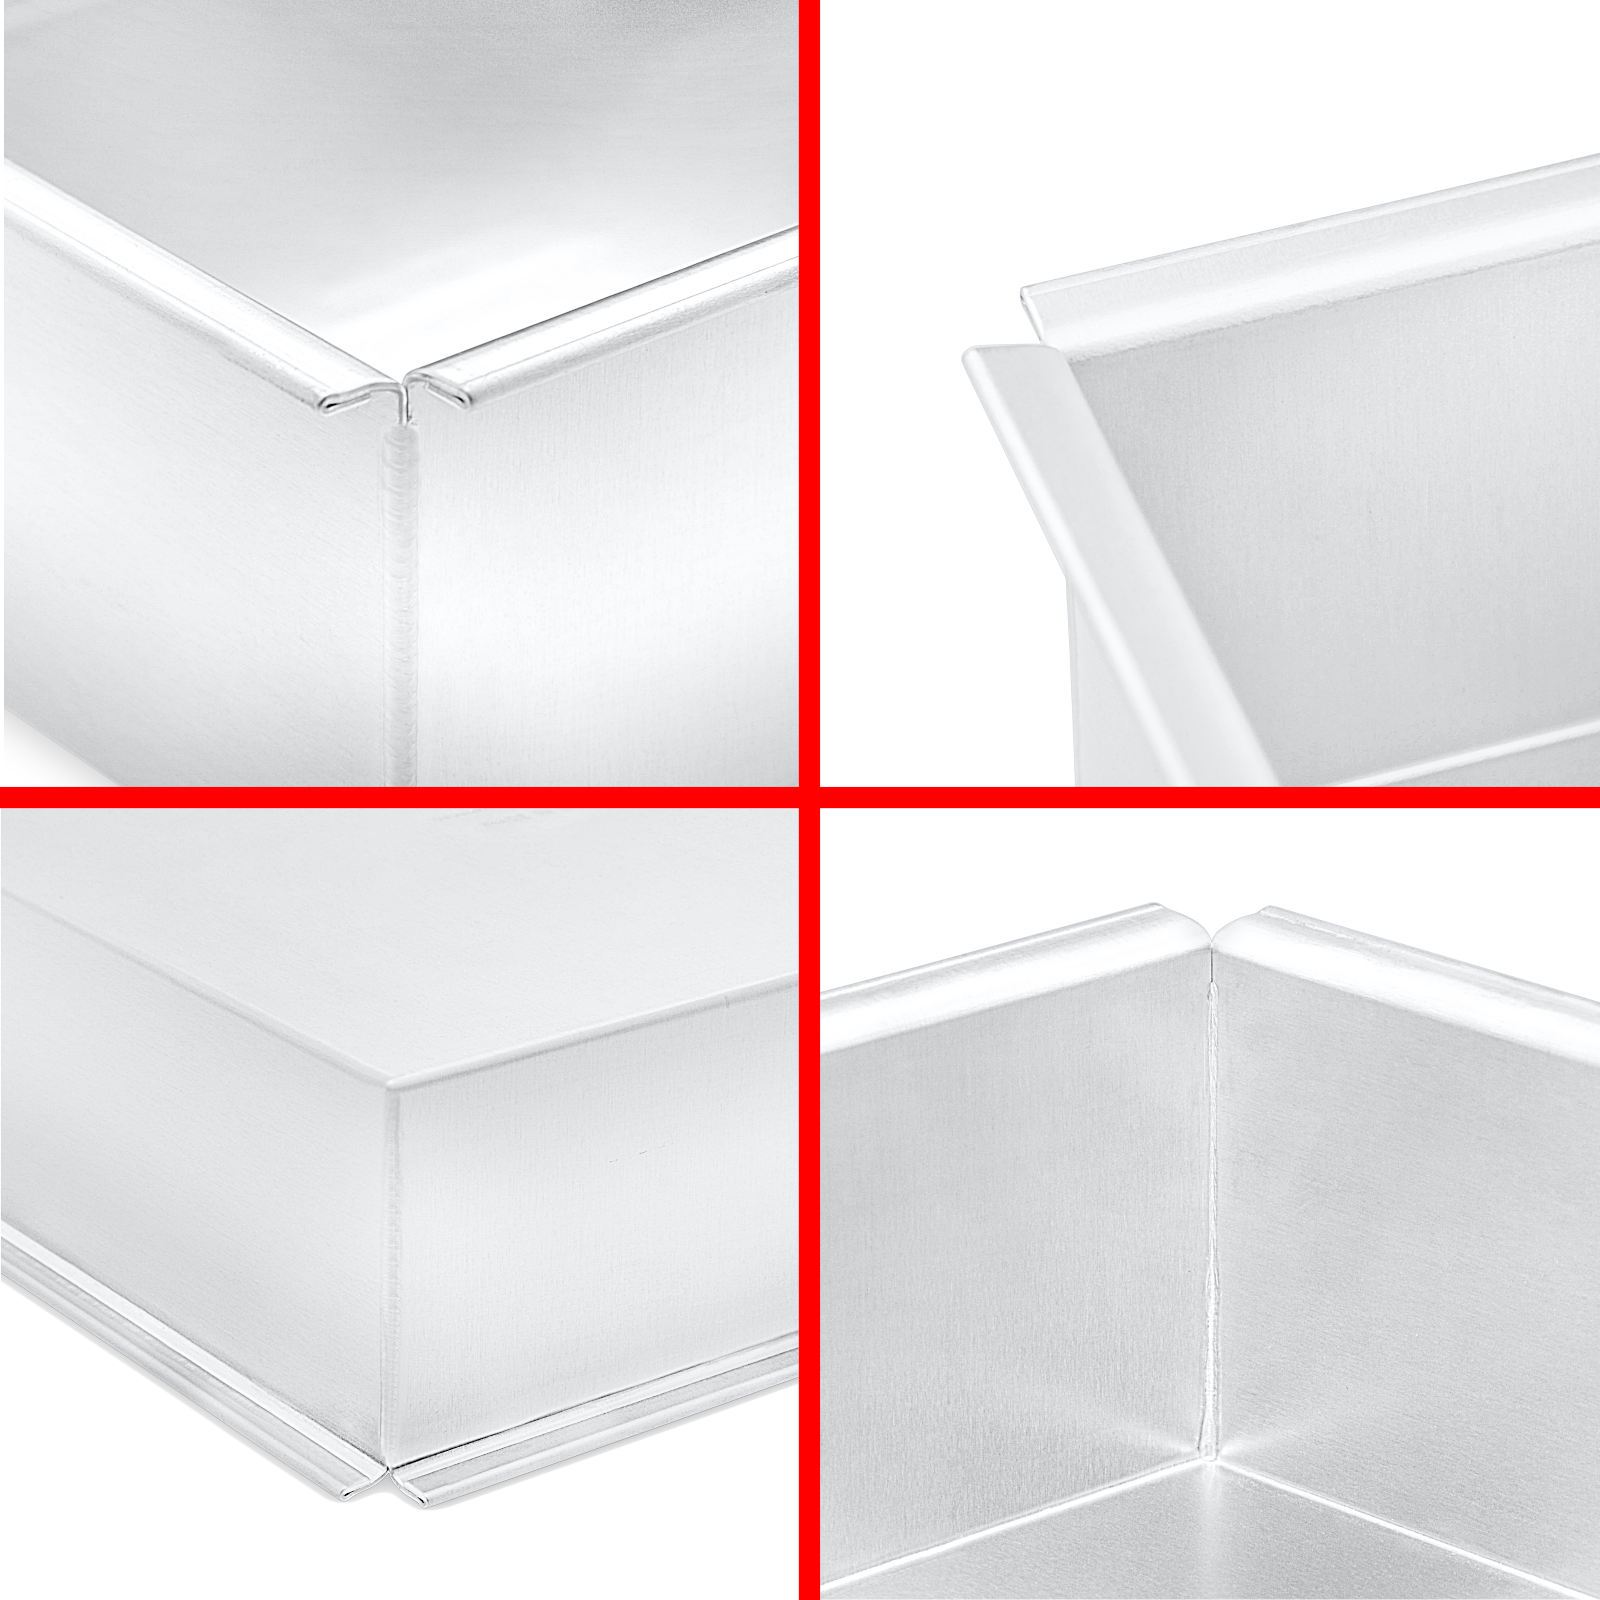 Rectangle Cake Pans – Crown Cookware